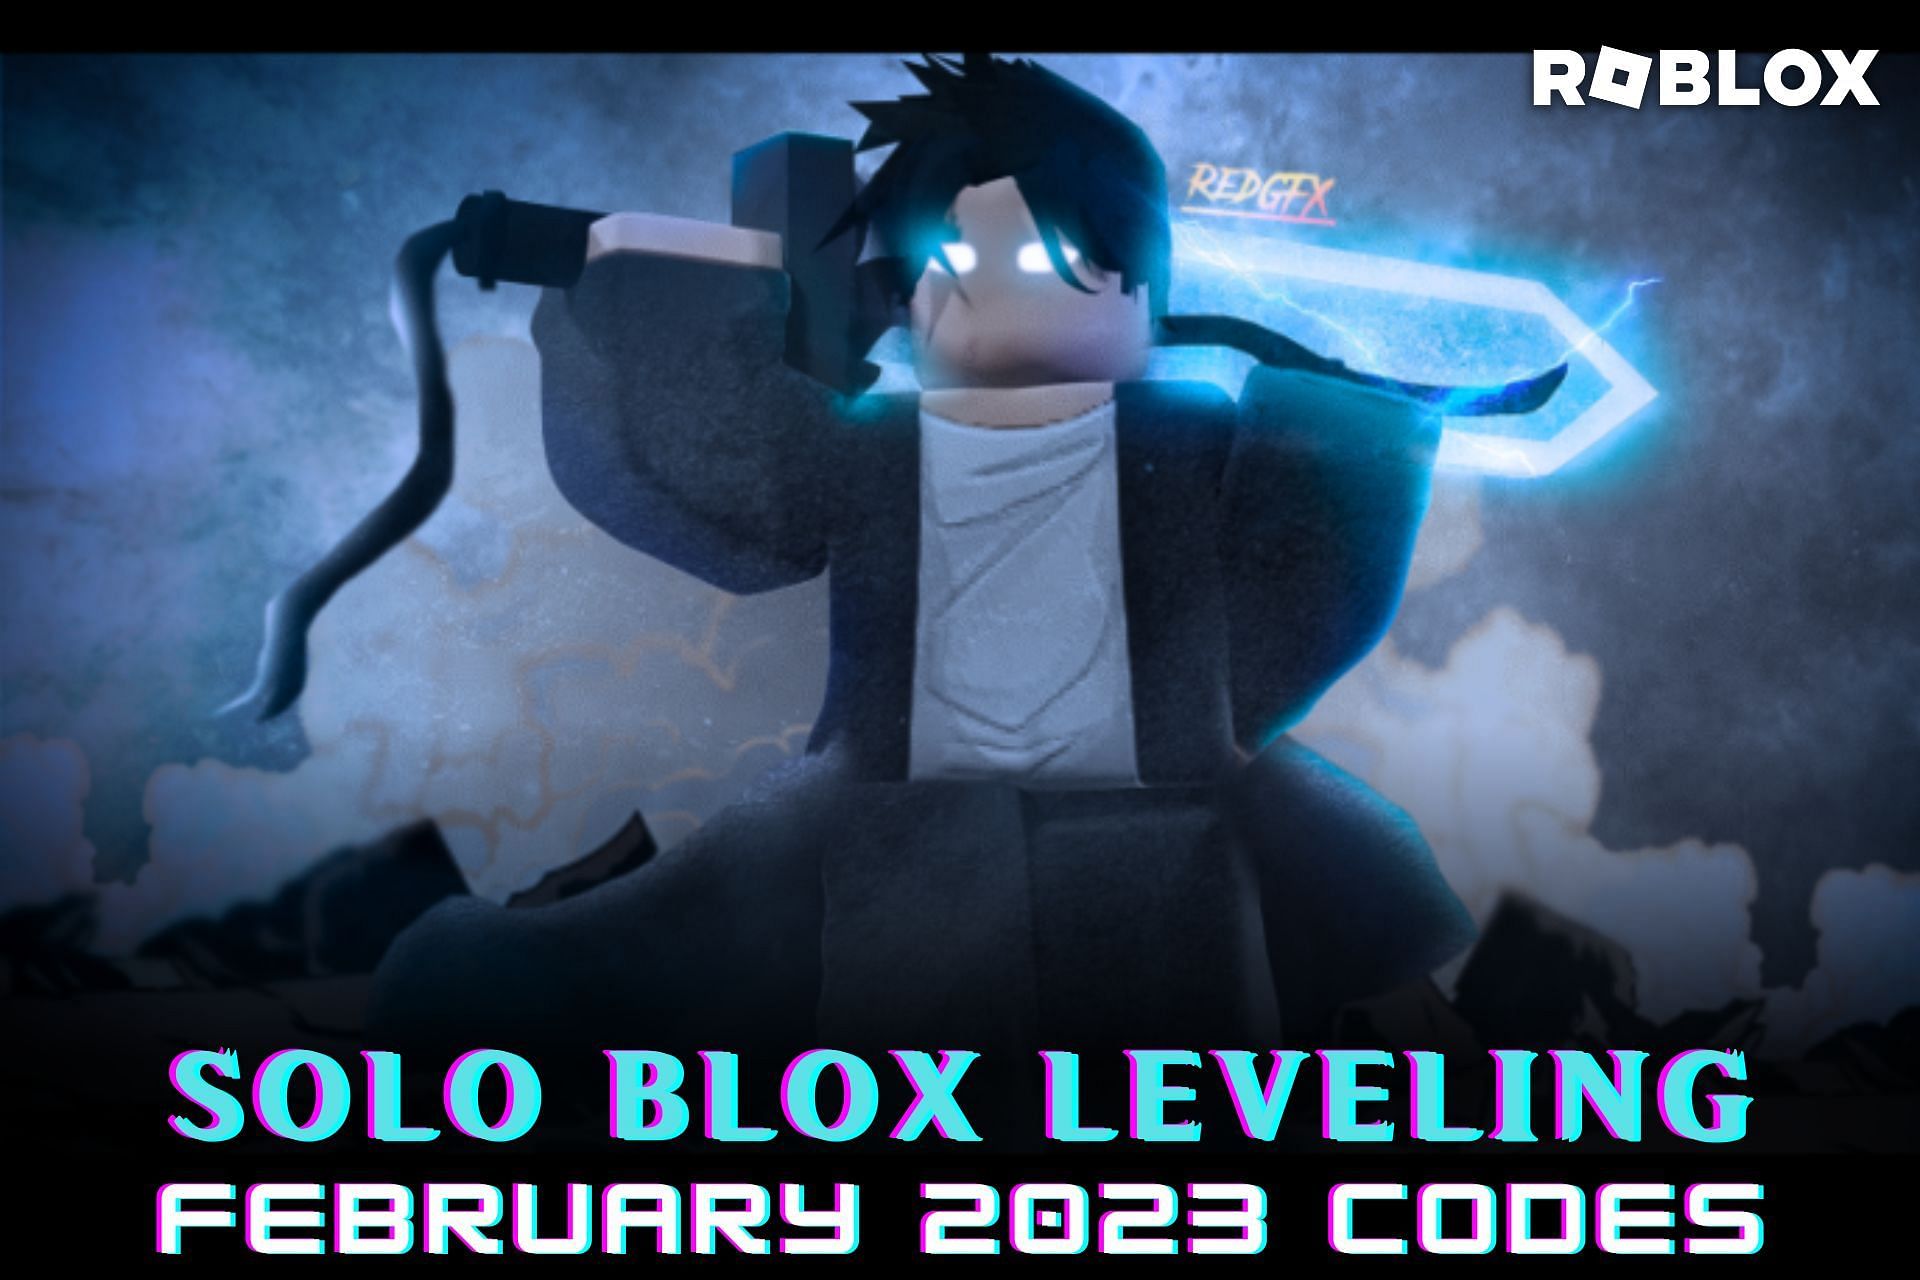 ALL NEW FEBRUARY ROBLOX PROMO CODES on ROBLOX 2022!